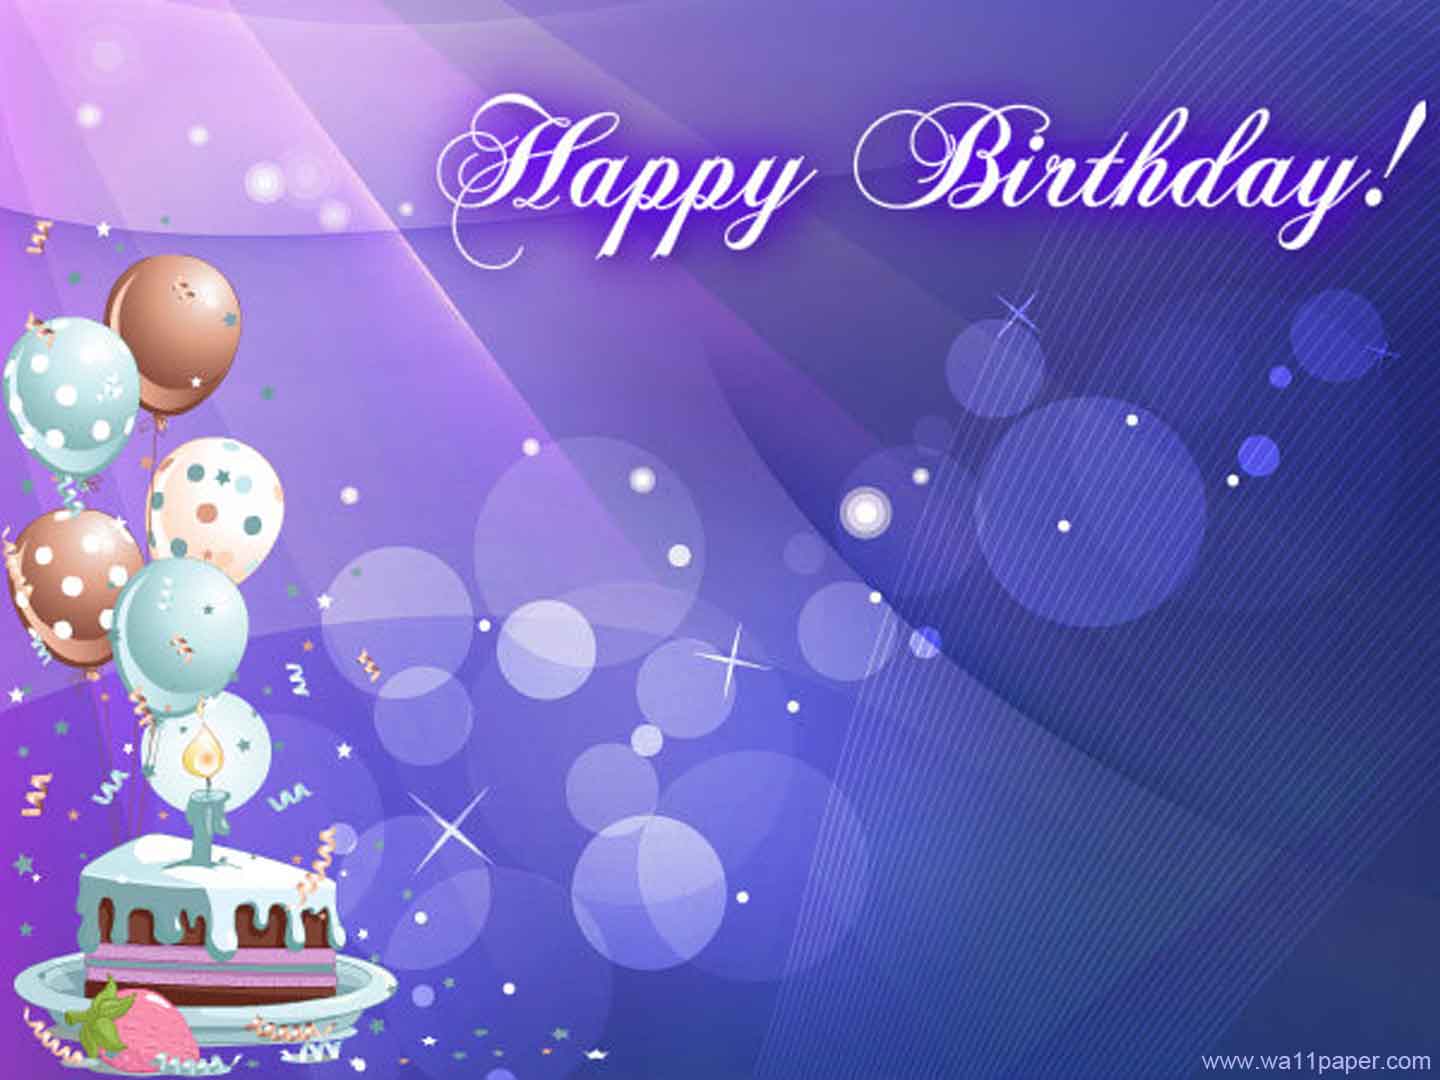 29 Birthday HD Wallpapers | Backgrounds - Wallpaper Abyss